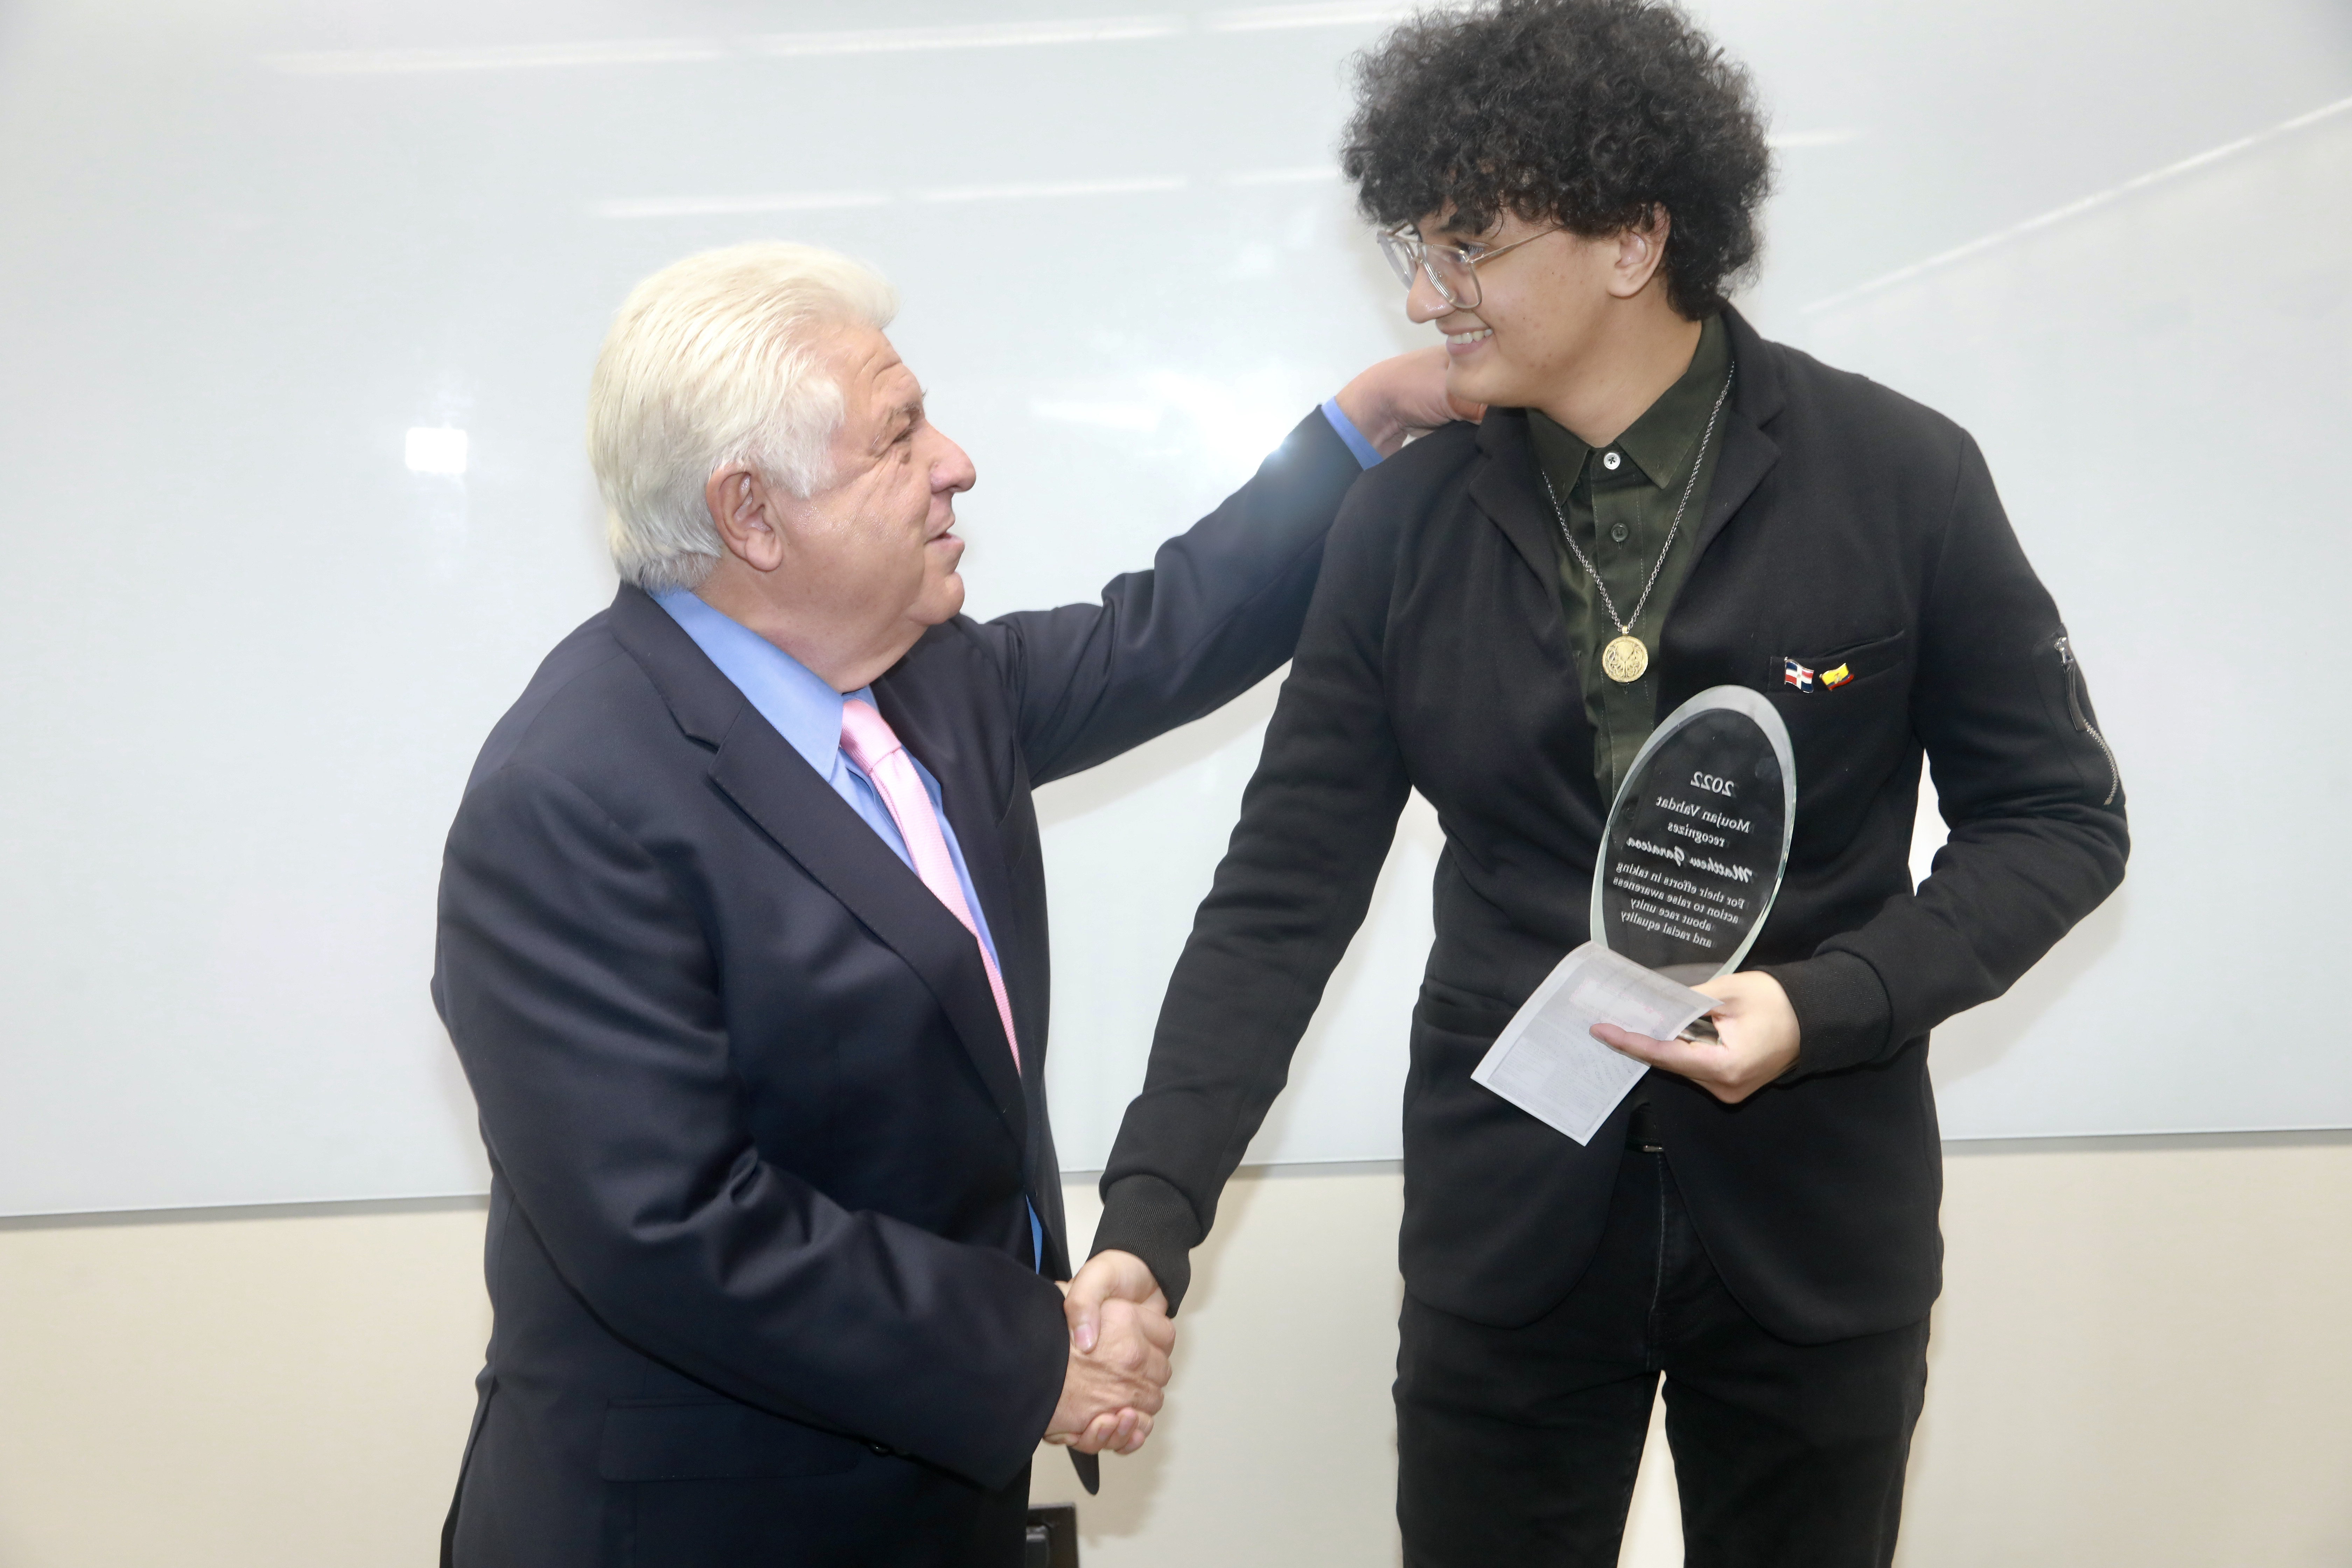 An older man with white hair wearing a suit presents an award to a tall, young man with curly hair.